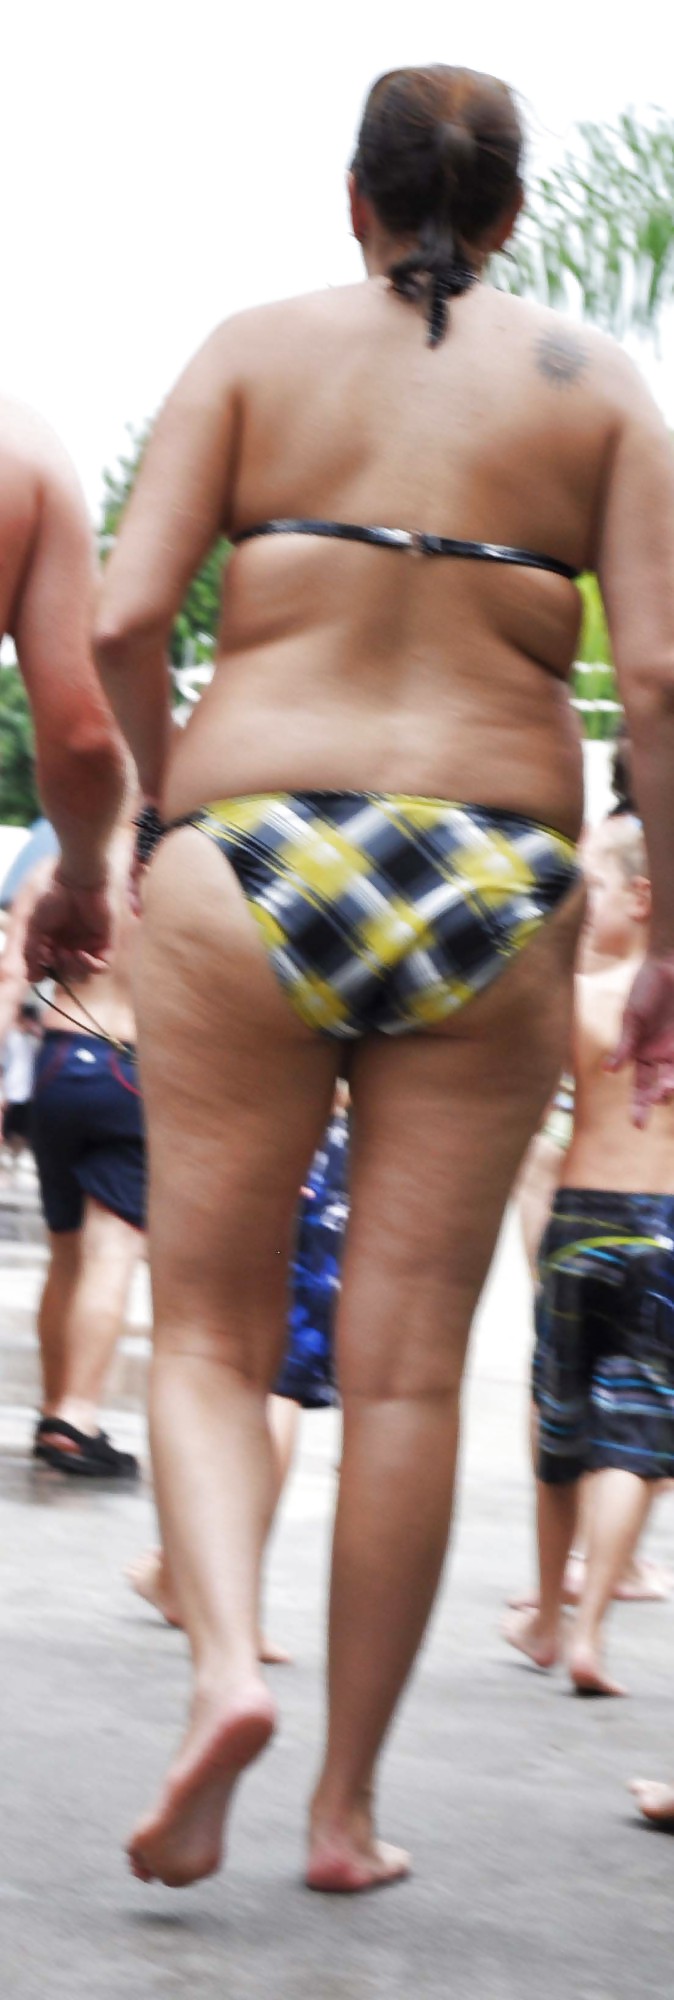 Chubby Ass in Bathing Suit #14037923